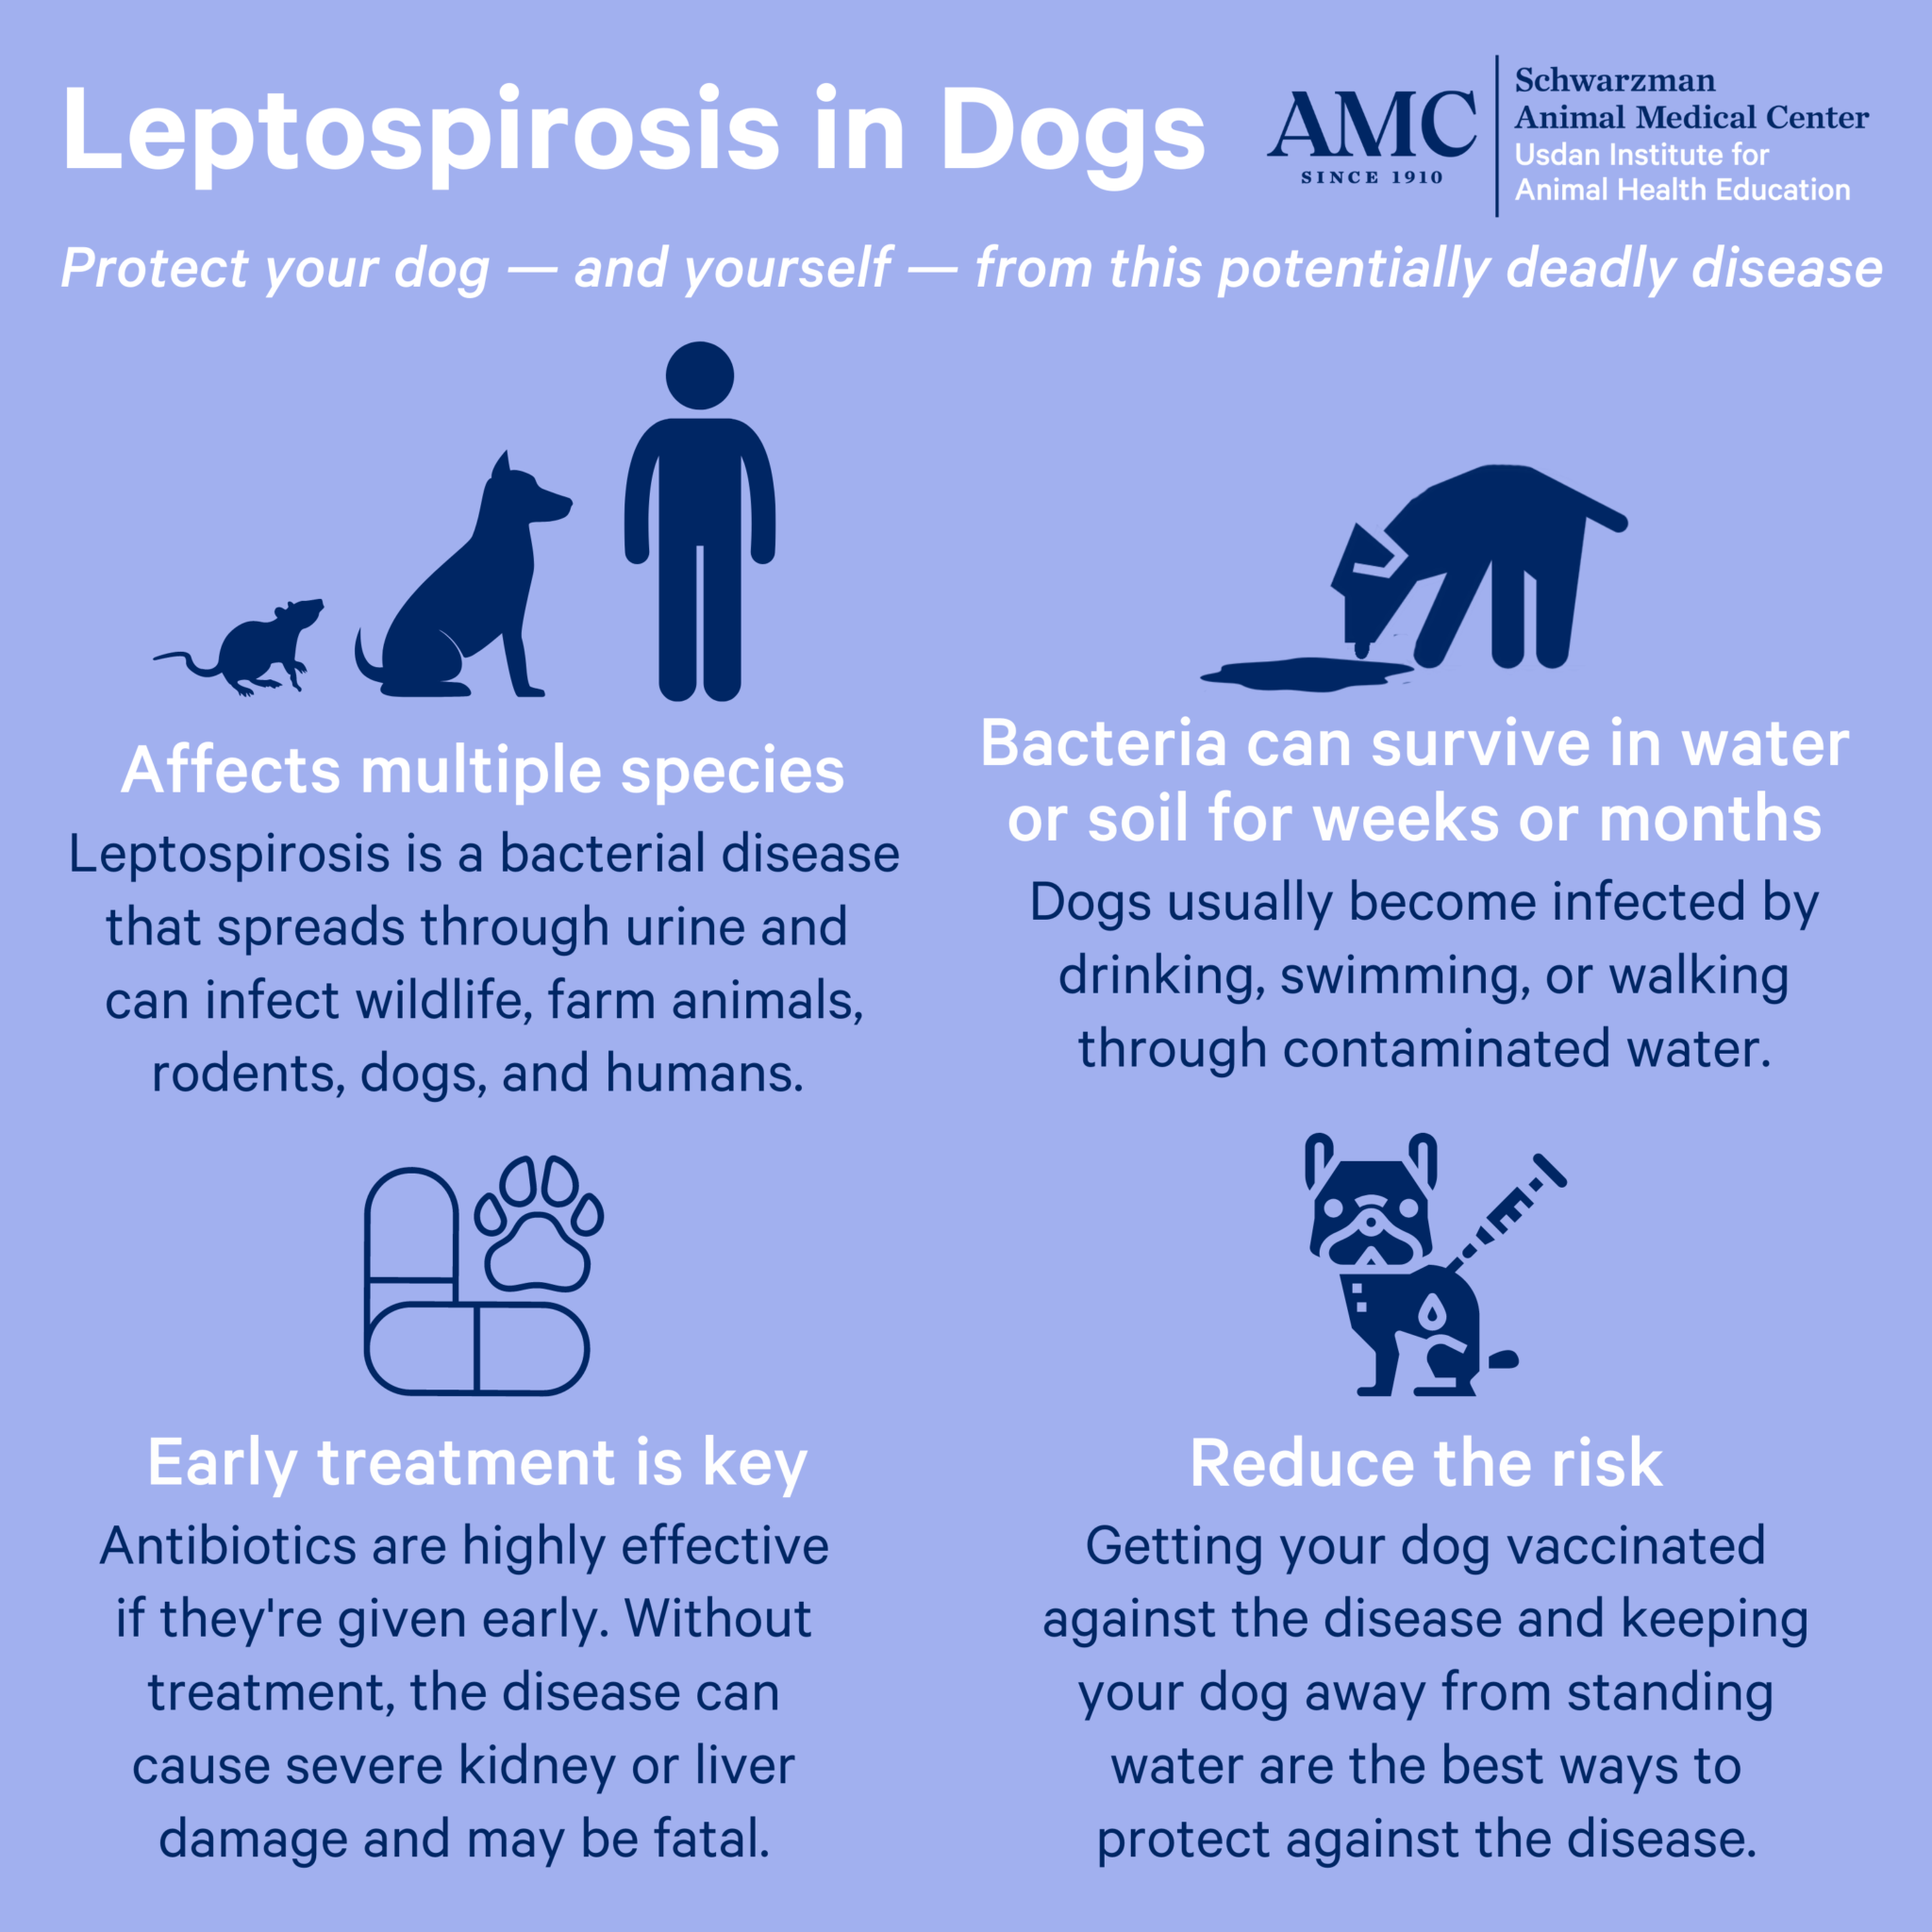 Leptospirosis in Dogs: Signs, Treatments, and Prevention